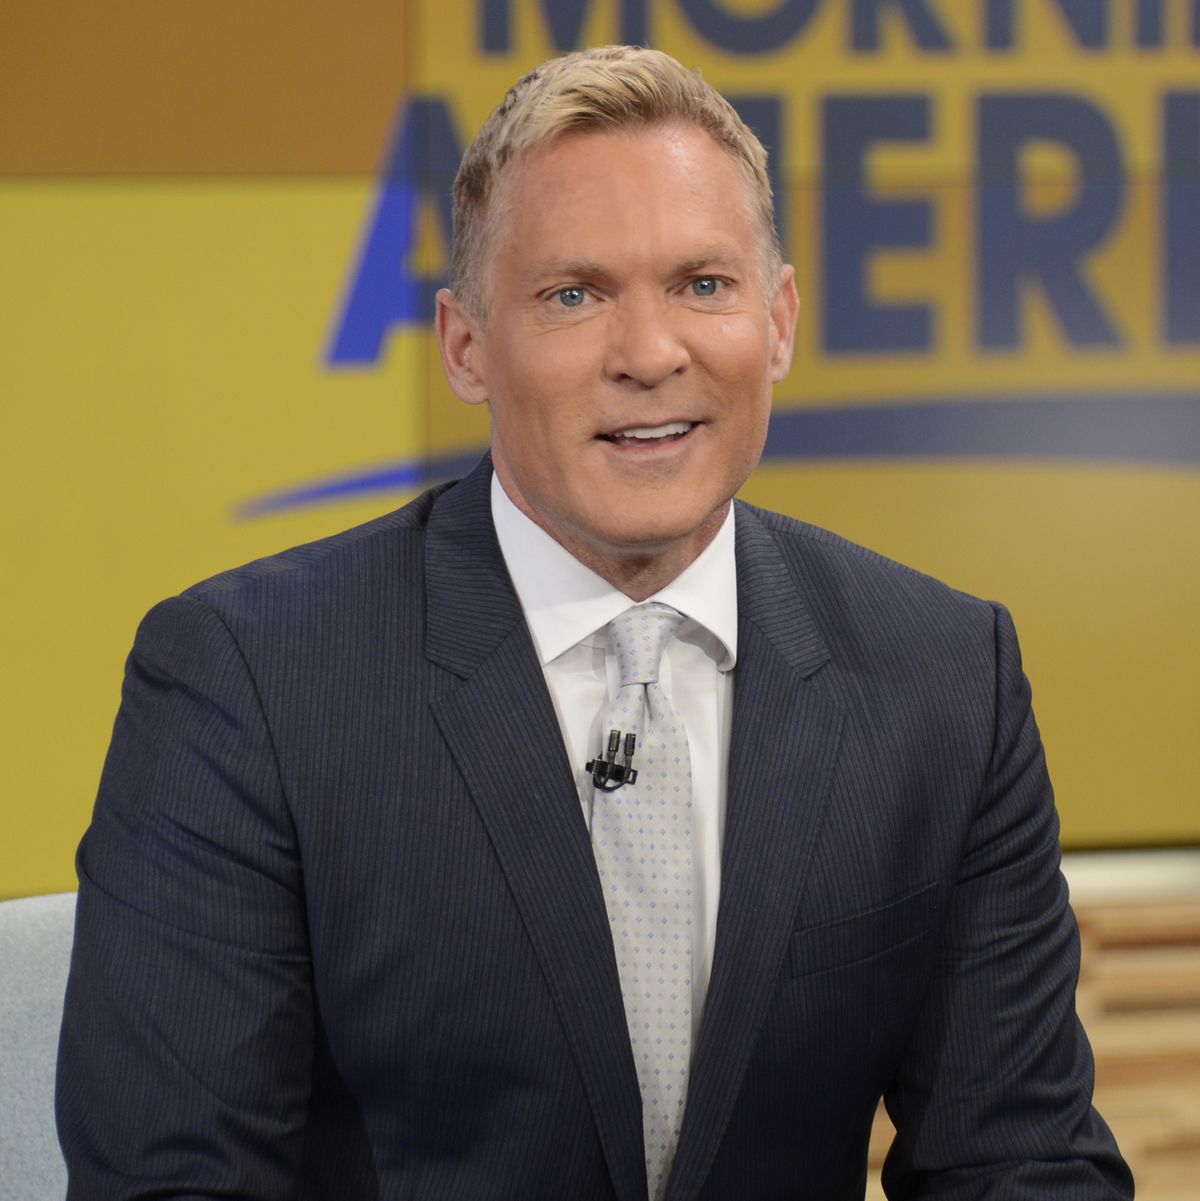 Is Sam Champion Back on ABC and 'GMA'? - The Latest on the 'Good Morning America' Weather Anchor